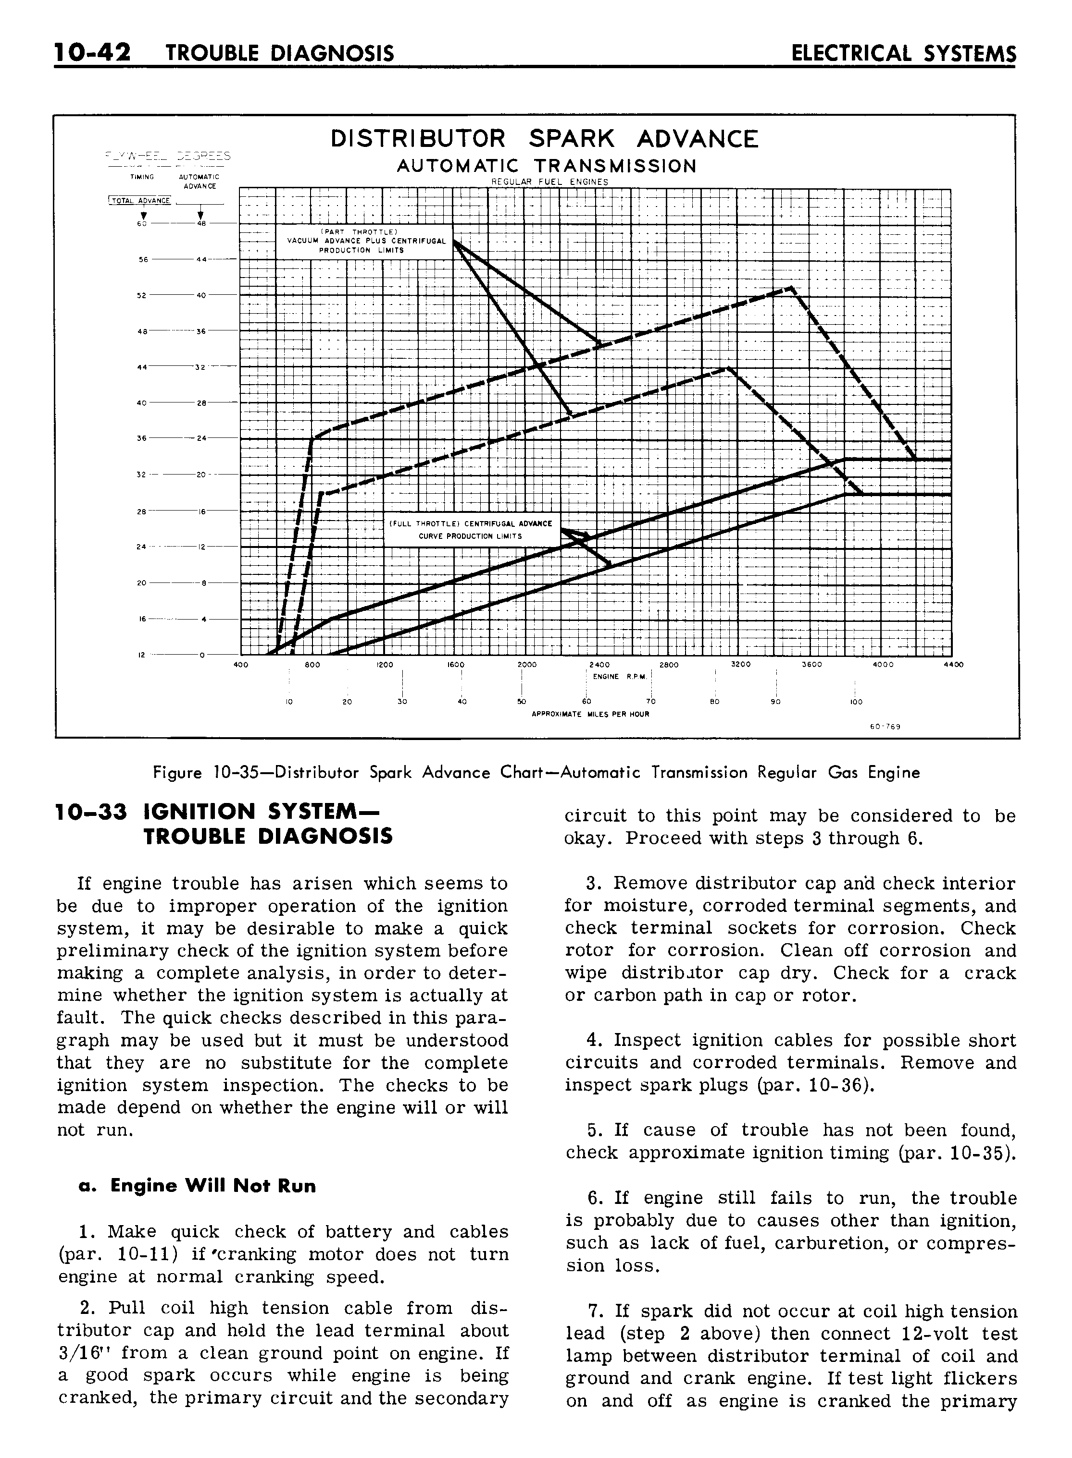 n_10 1961 Buick Shop Manual - Electrical Systems-042-042.jpg